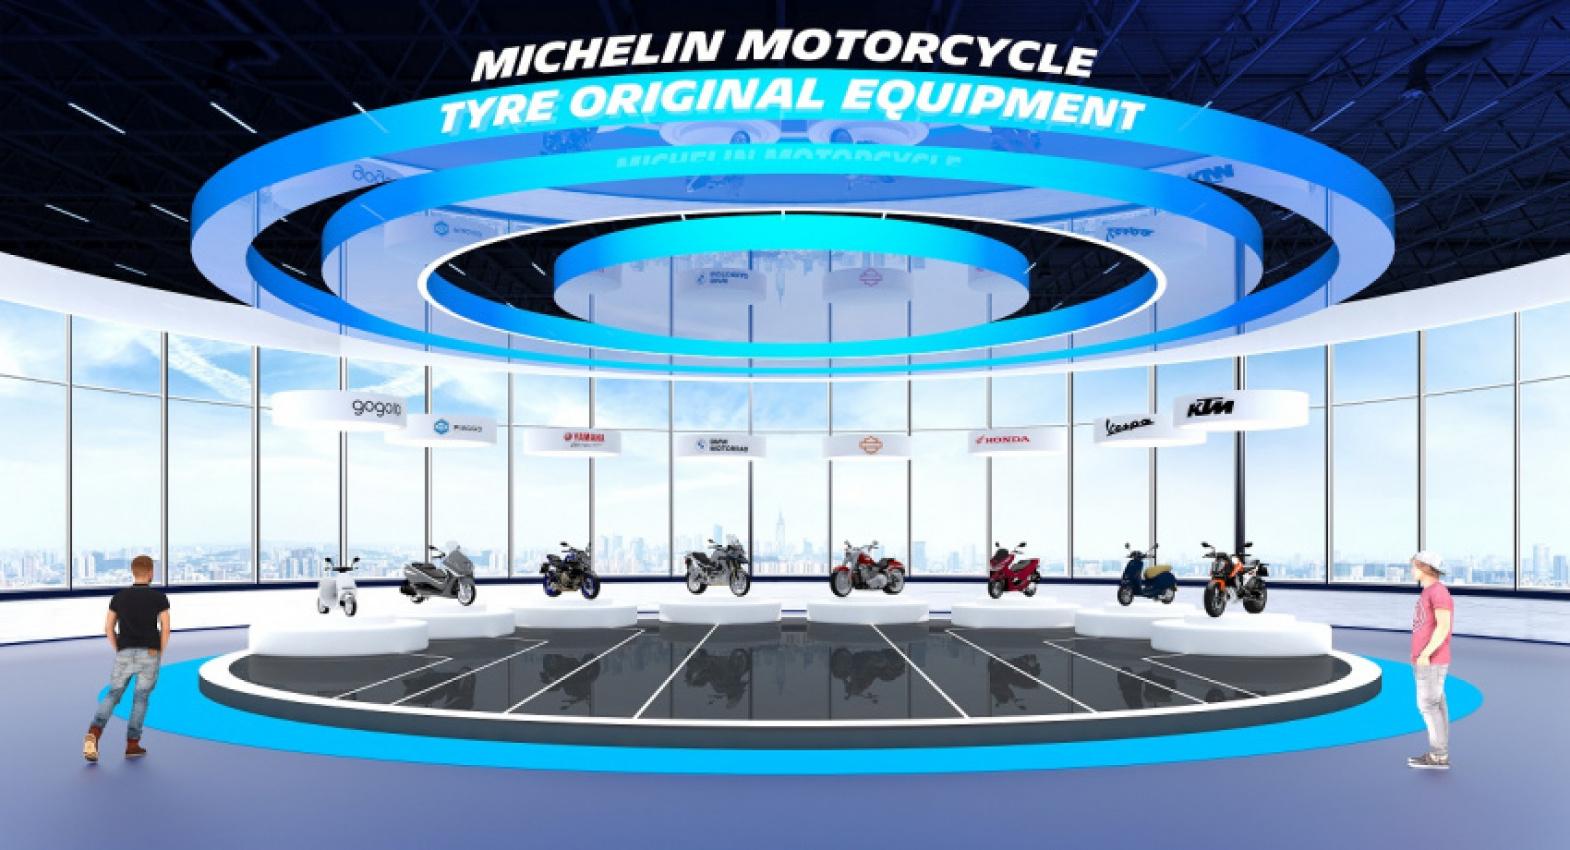 autos, bikes, cars, michelin, michelin guide, motoe, motogp, motorbikes, motorcycles, tires, virtual, see the latest innovations in the michelin motorcycle tyre virtual exhibition 2021